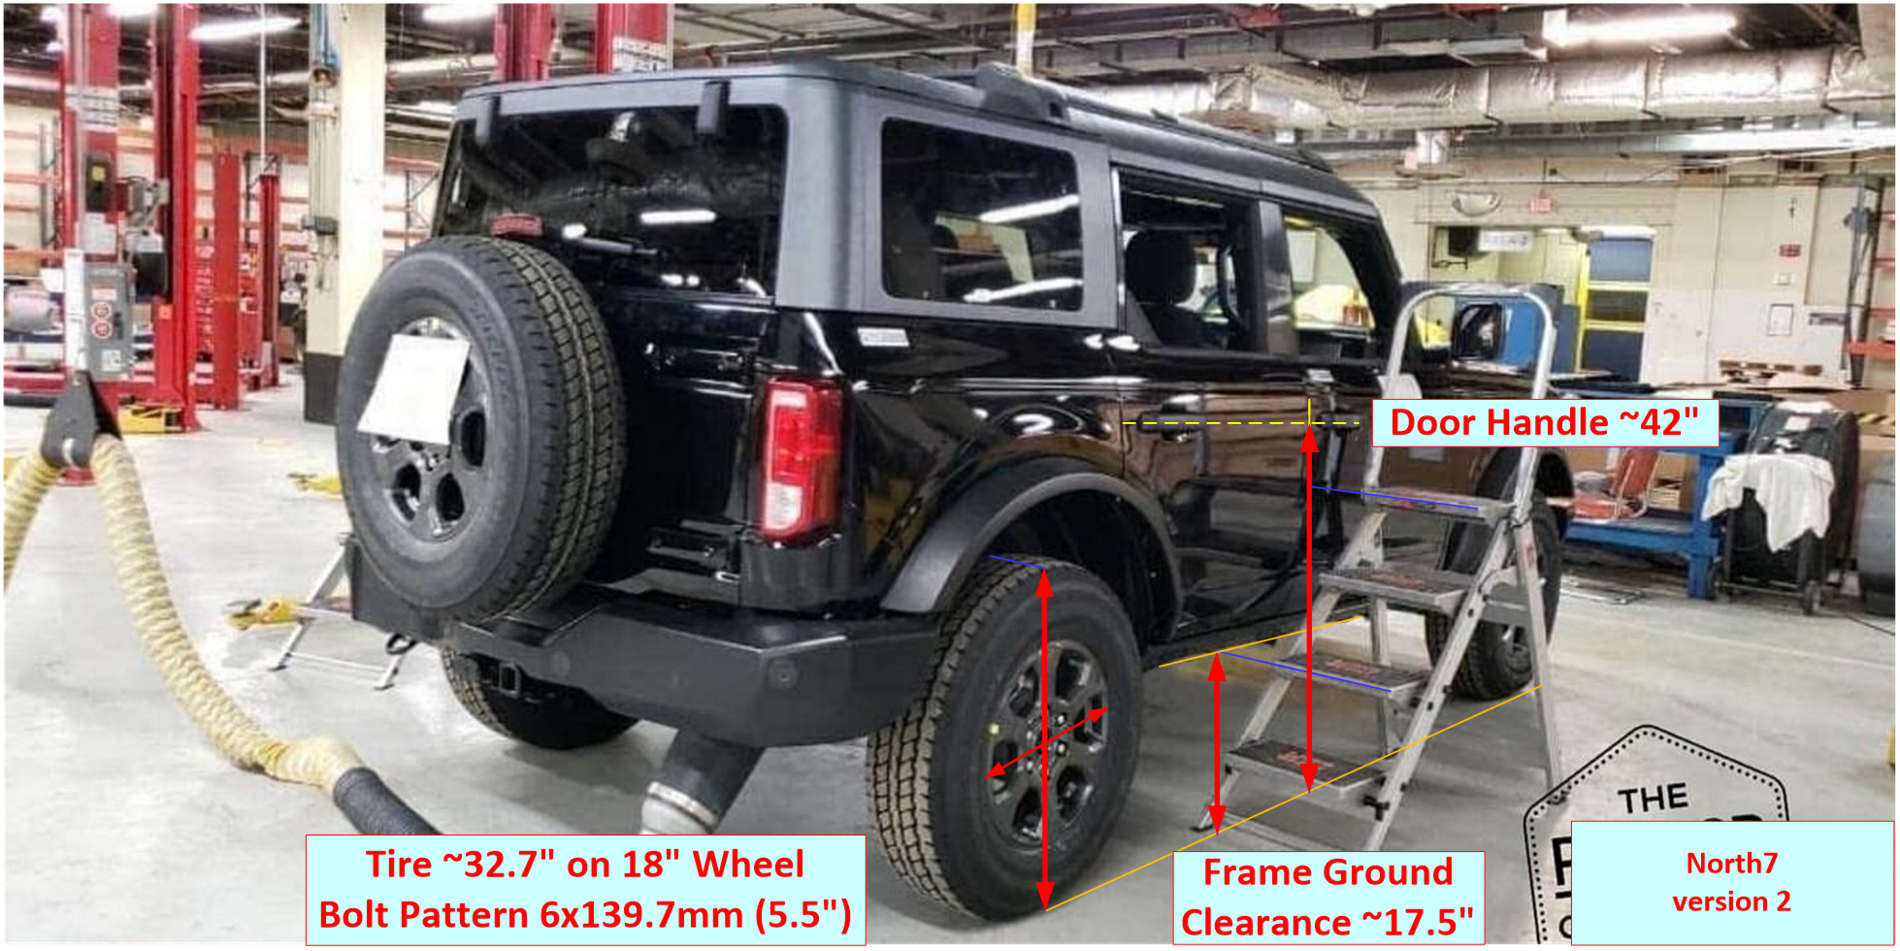 Ford Bronco 2021 Bronco 4 Door Tire Size, Ground Clearance, Door Handle  Estimates Based on Leaked Image 2021 Bronco Clearance v2